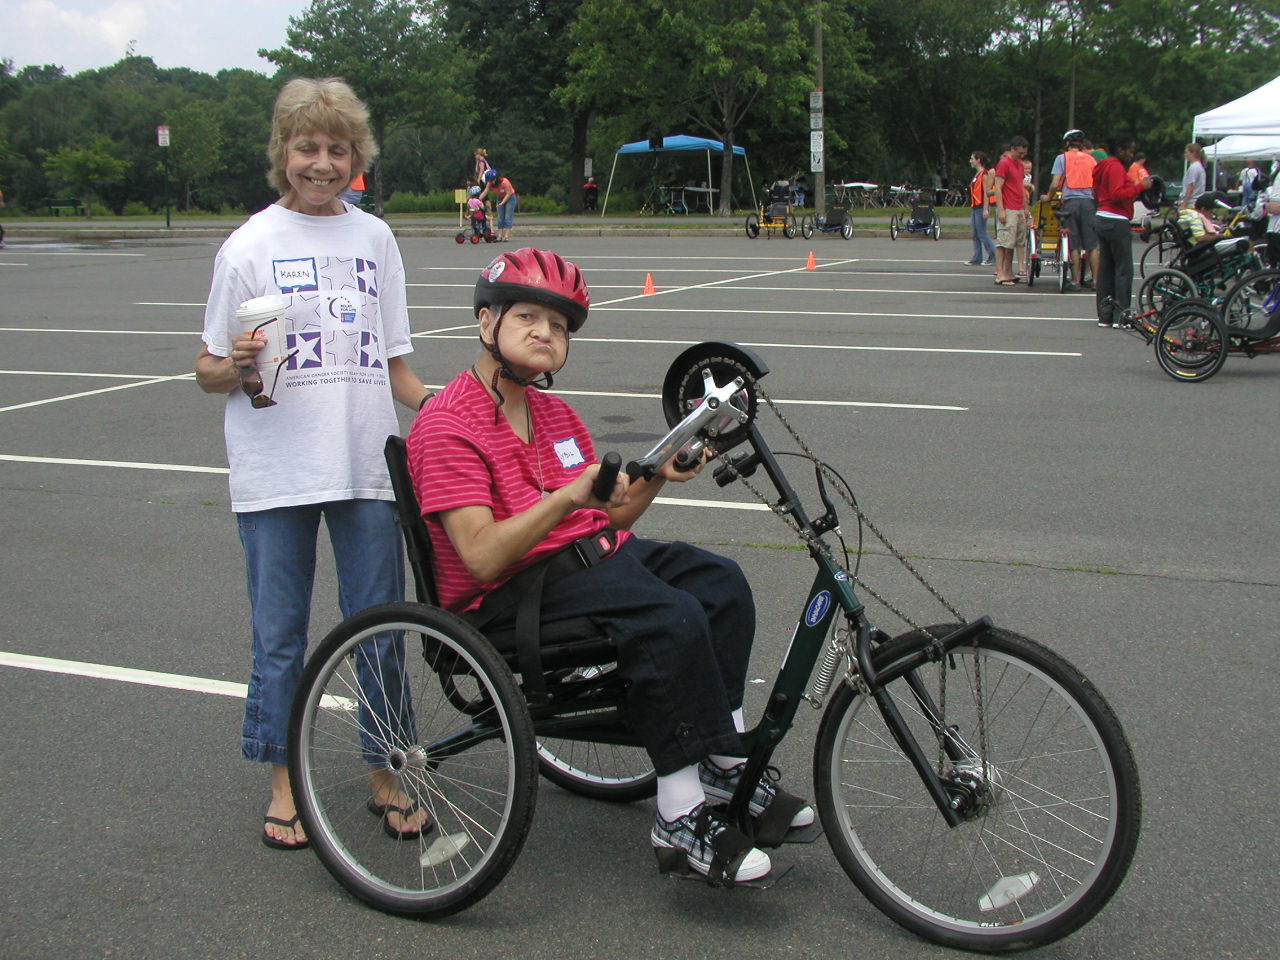 Person sitting on Invacare Bike next to person standing and smiling at the camera